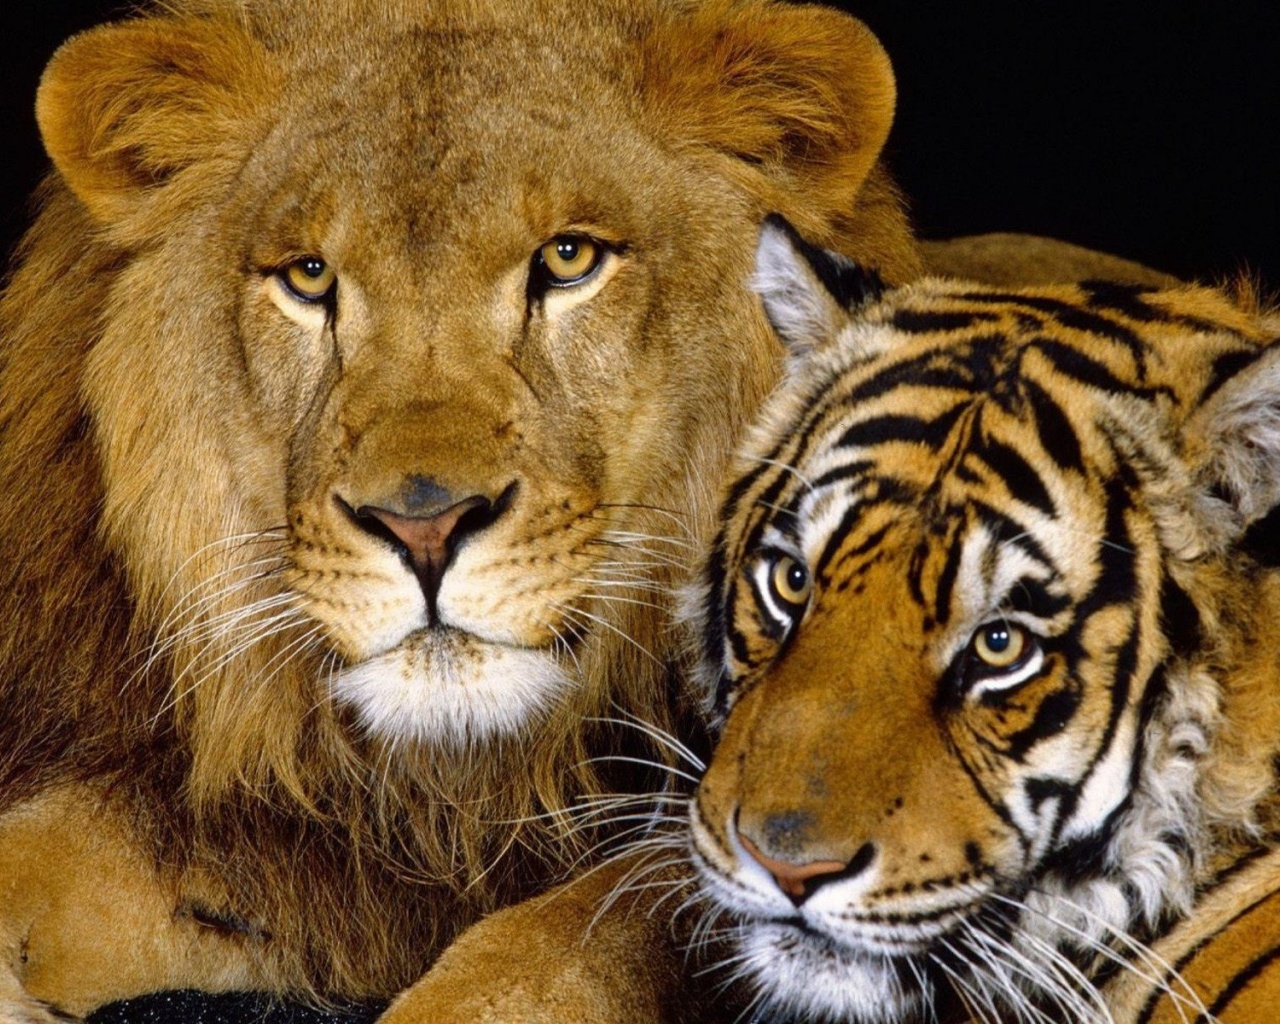 Tiger And Lion1